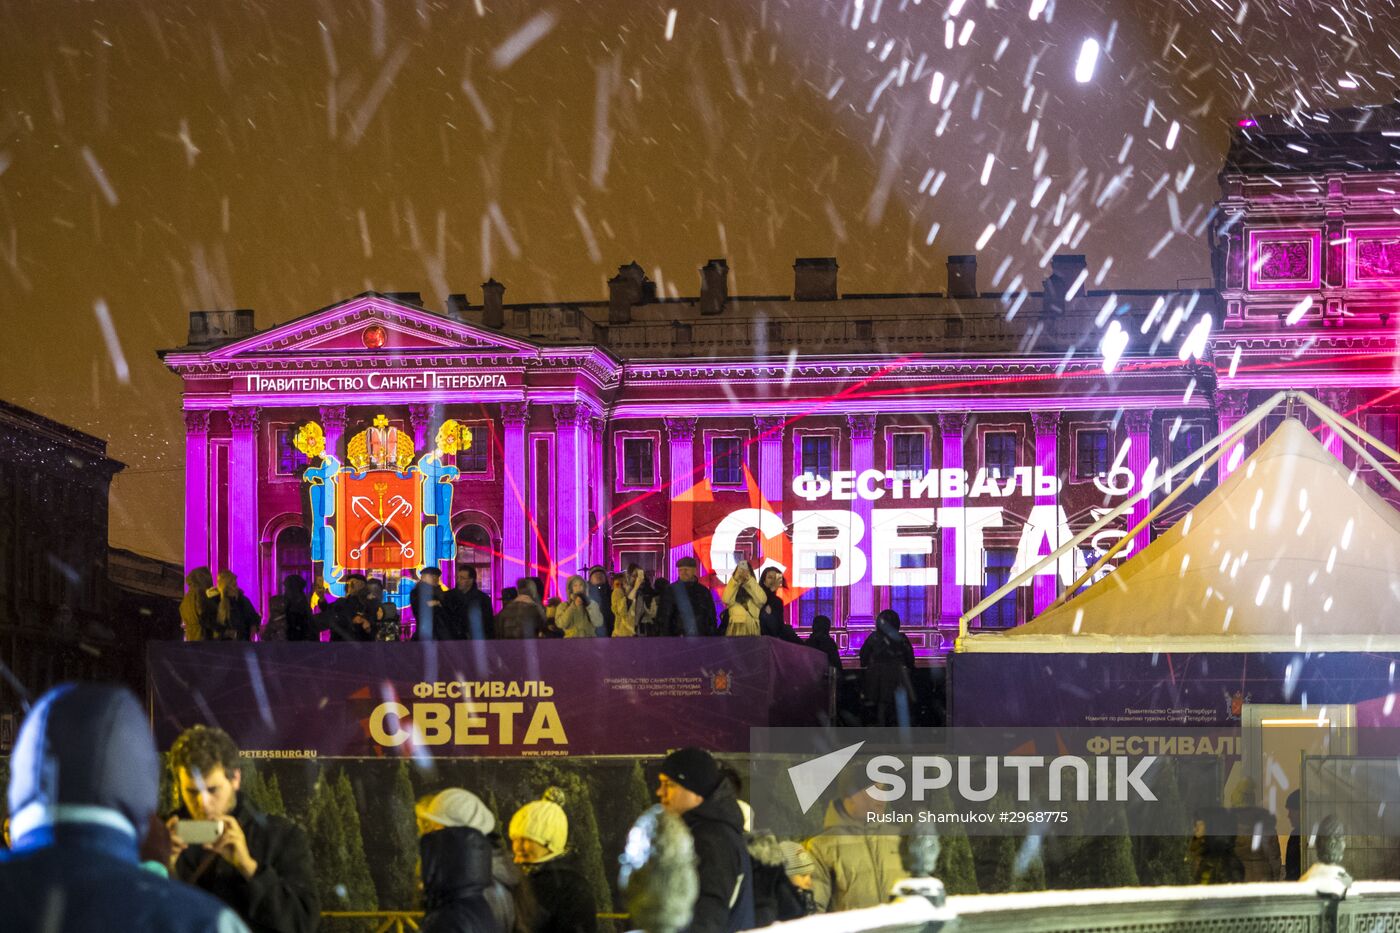 Multimedia 3D-mapping show in St. Petersburg